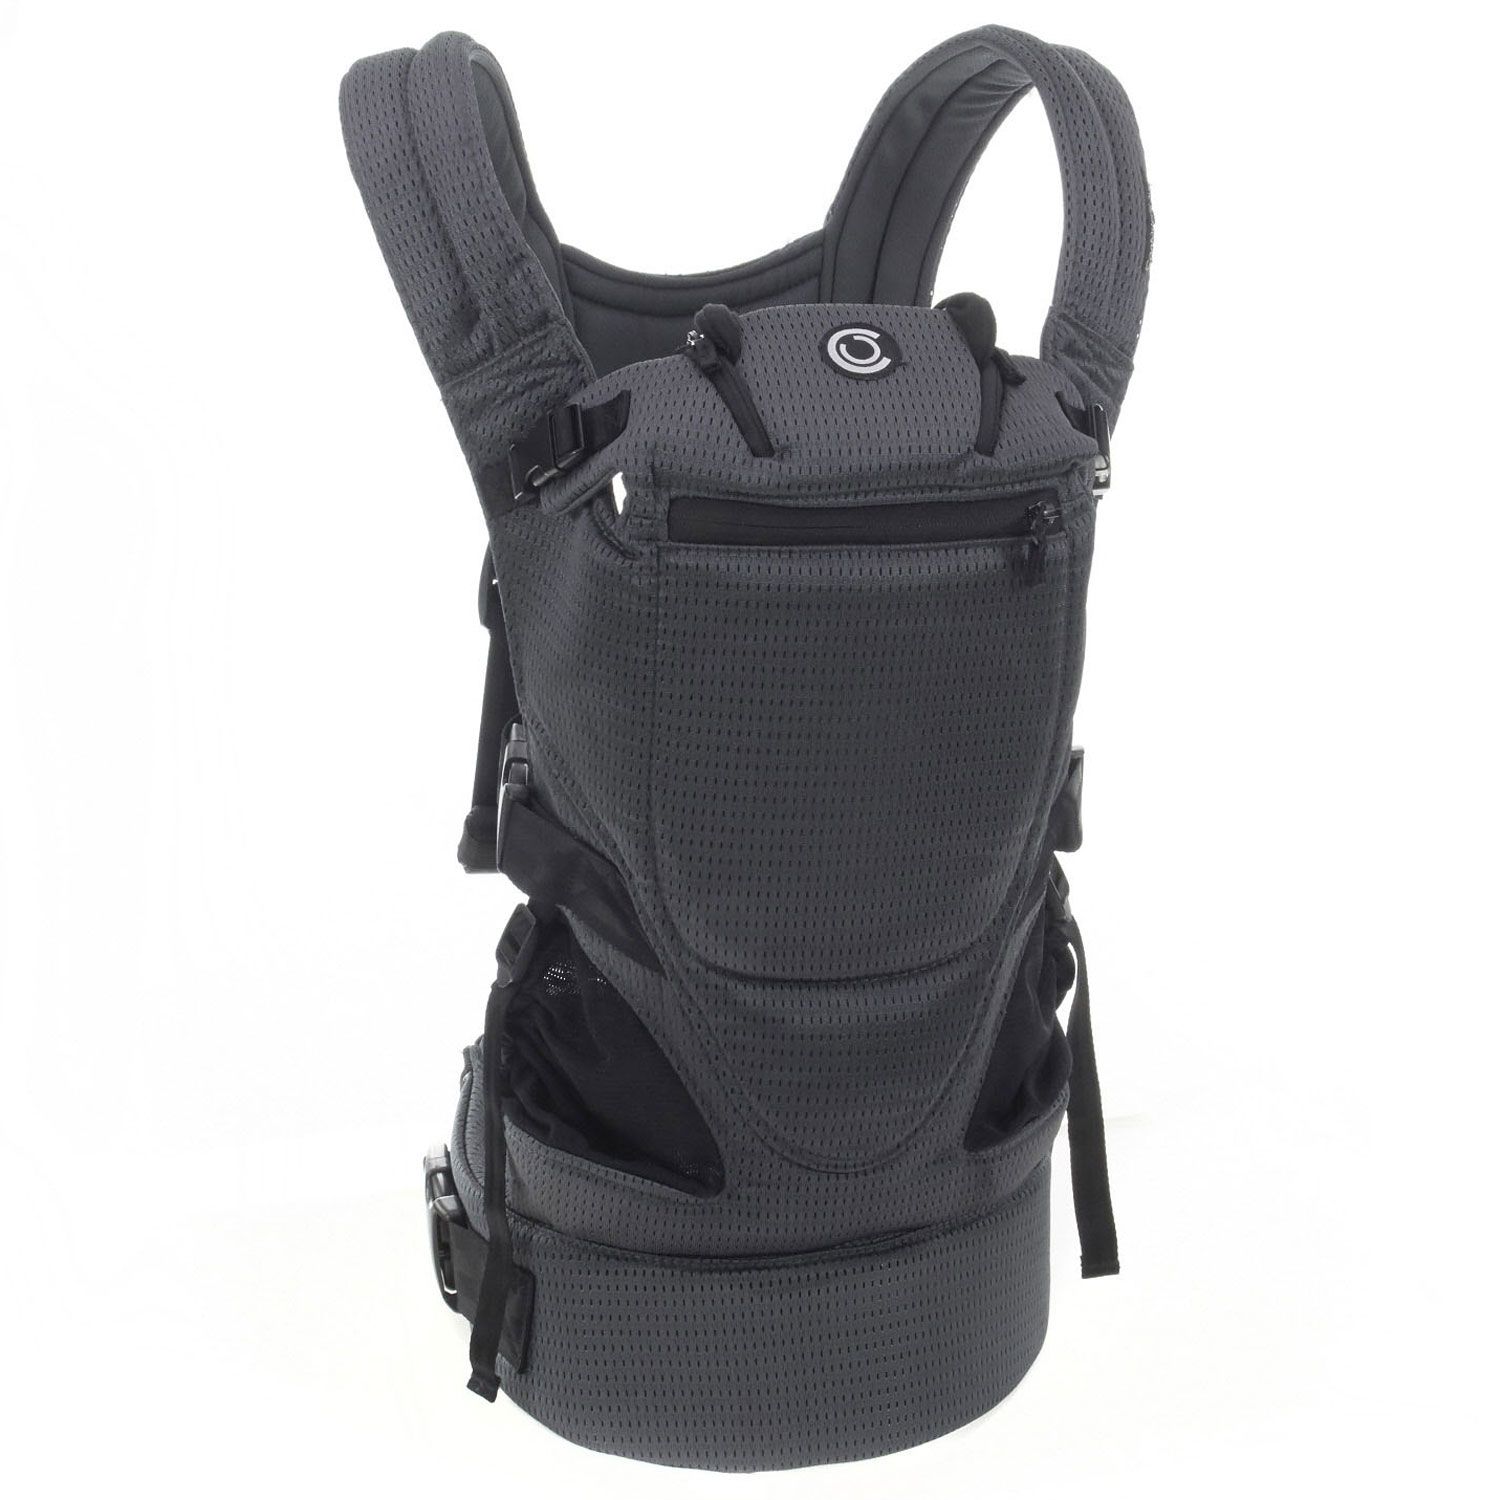 Contours Love 3-in-1 Baby and Child Carrier